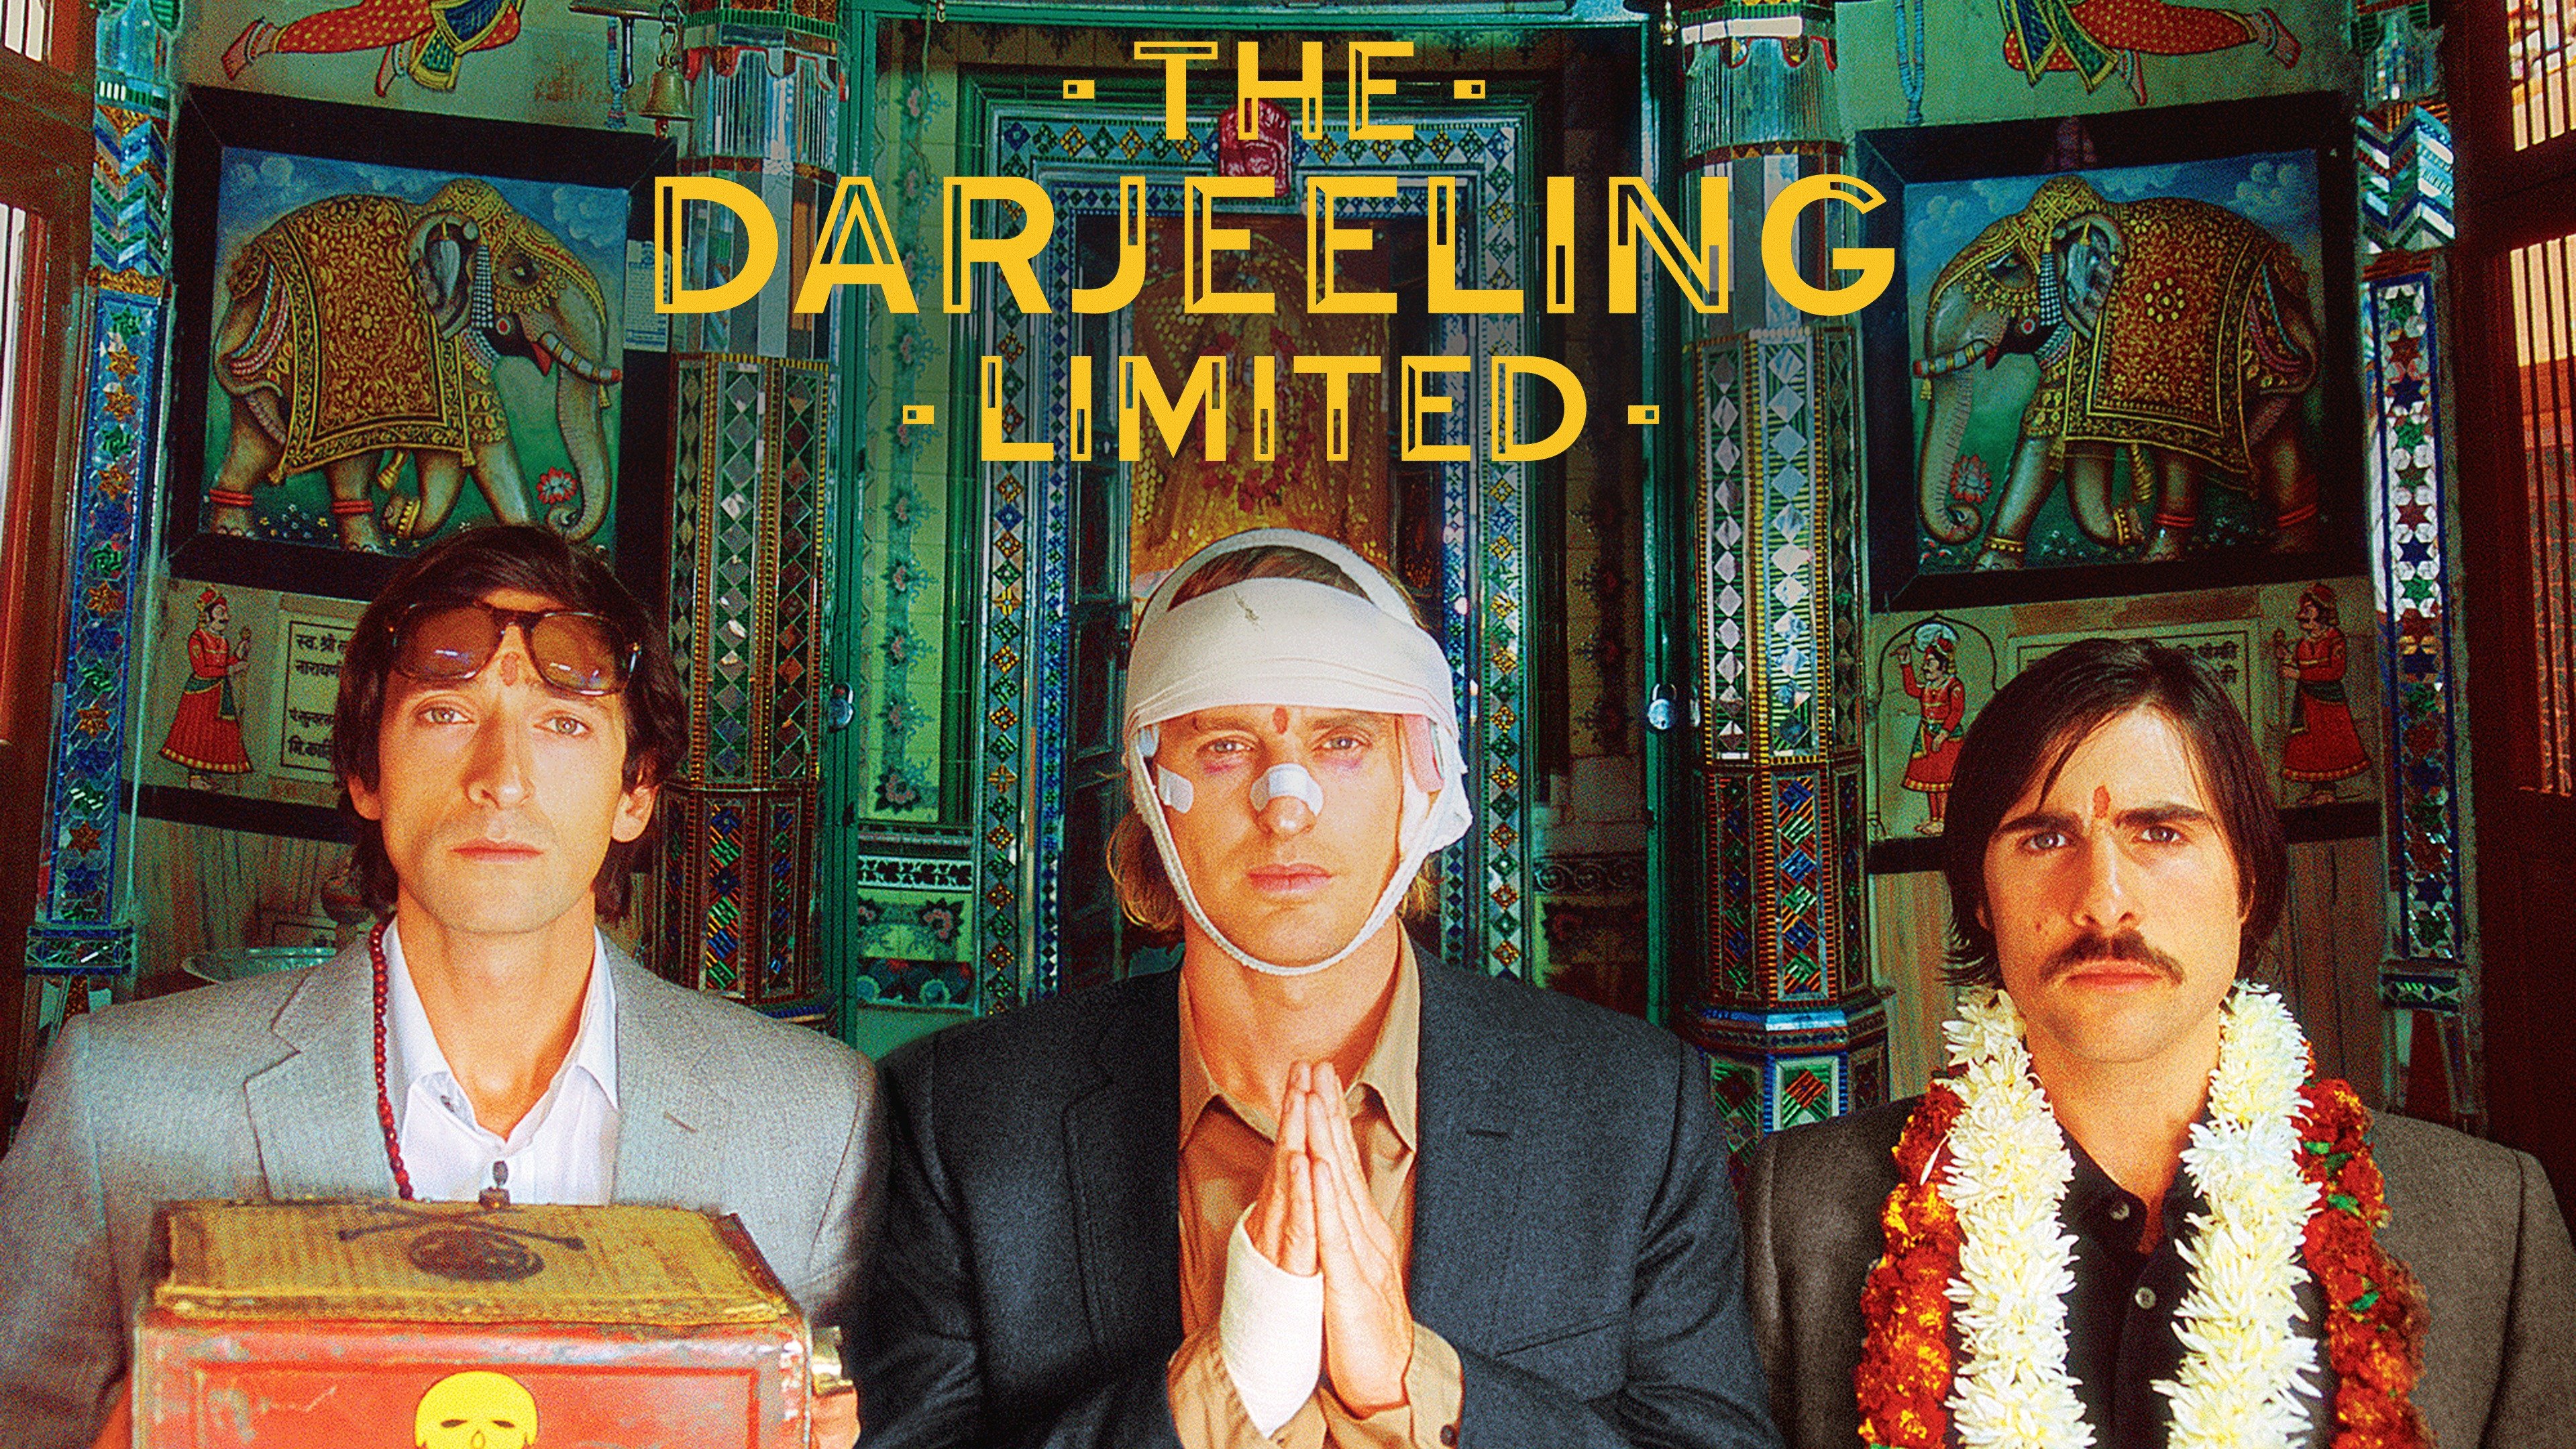 17 Wondrous Facts About Wes Anderson's 'The Darjeeling Limited